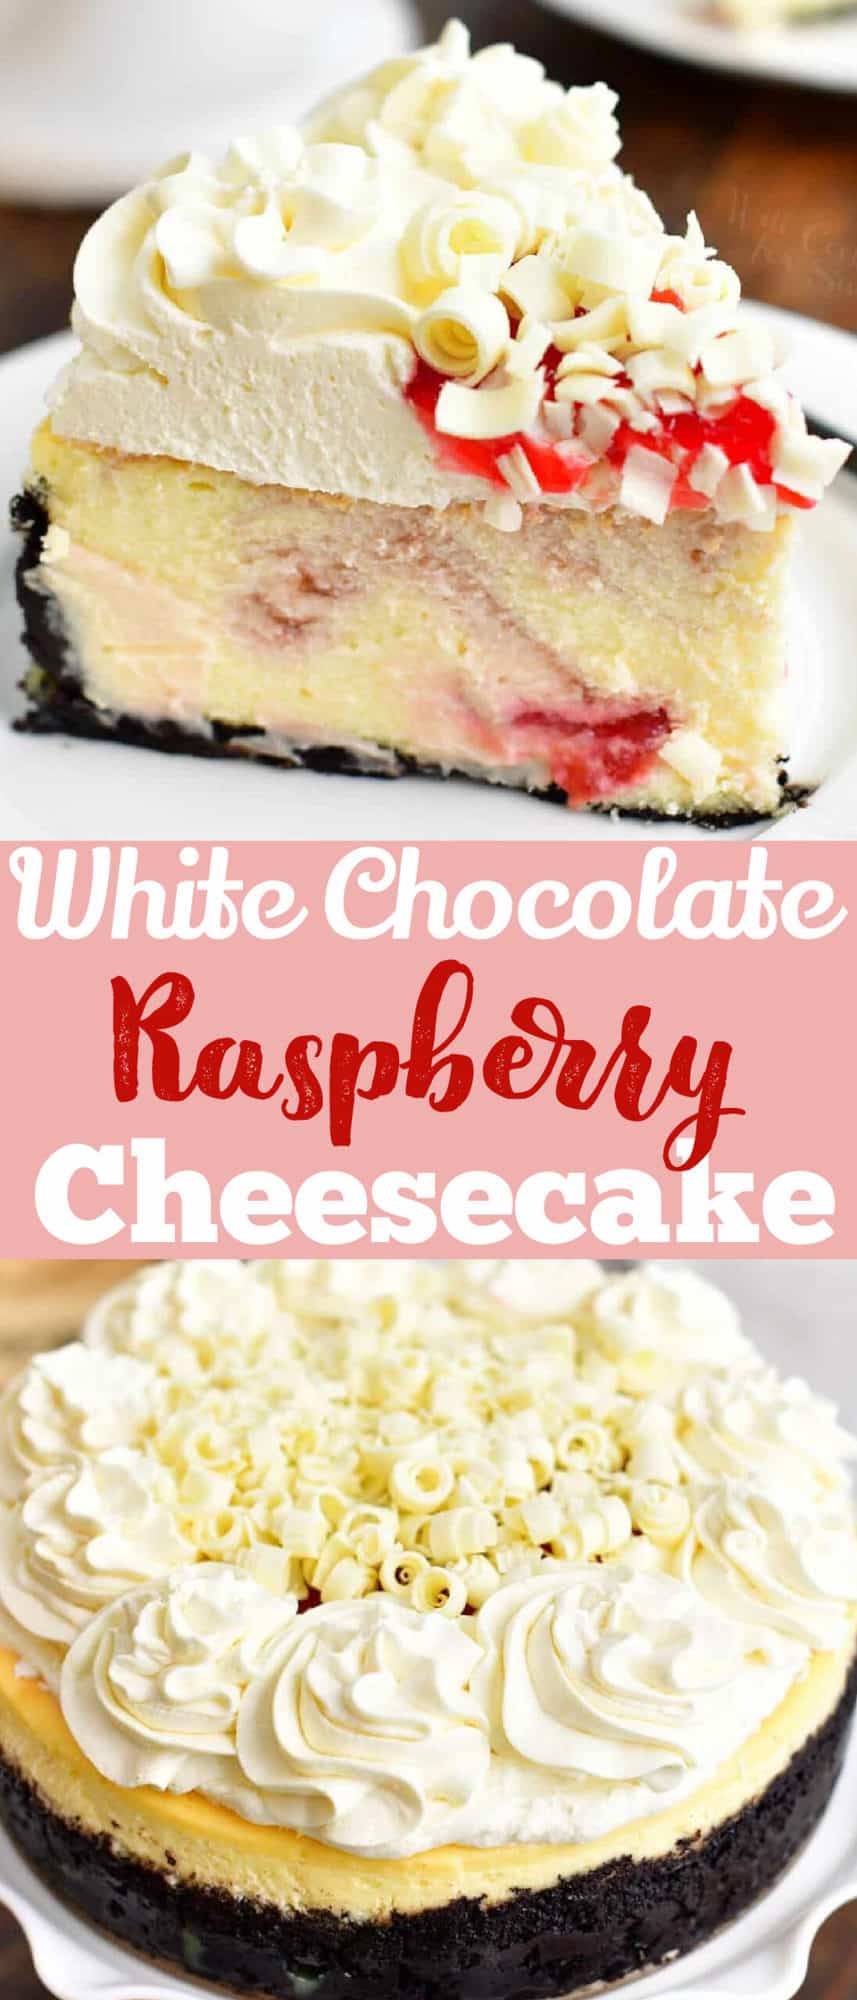 collage of cheesecake slice and full cheesecake with title in the middle